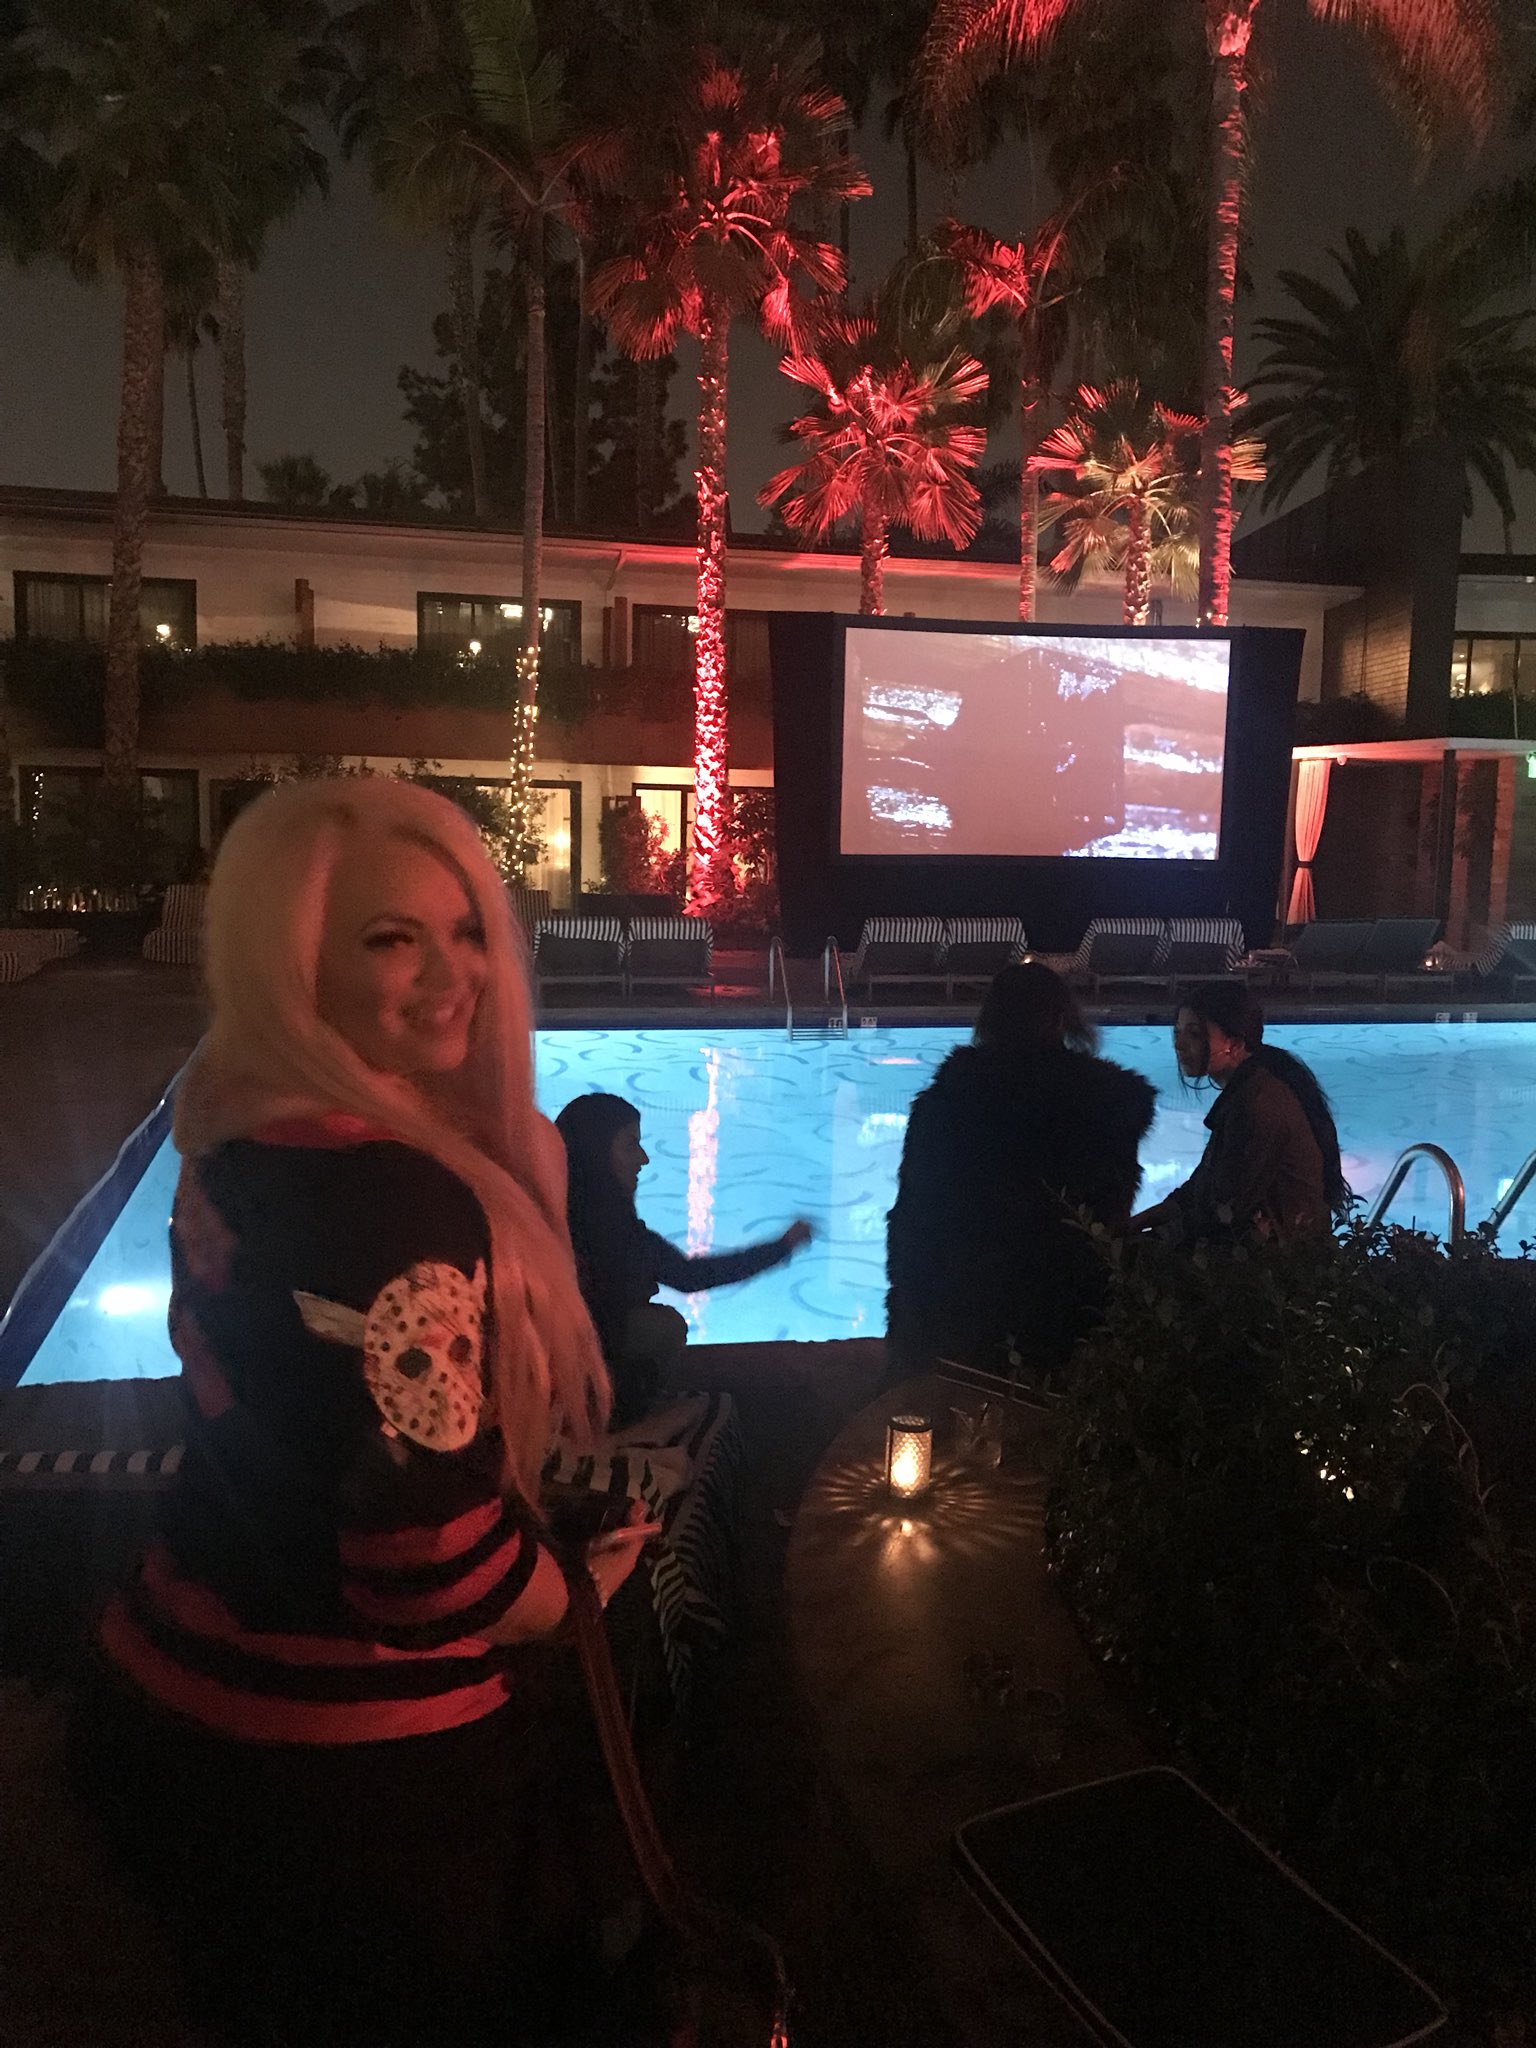 Trisha Paytas On Twitter Happy Friday The 13th Watching The Final 